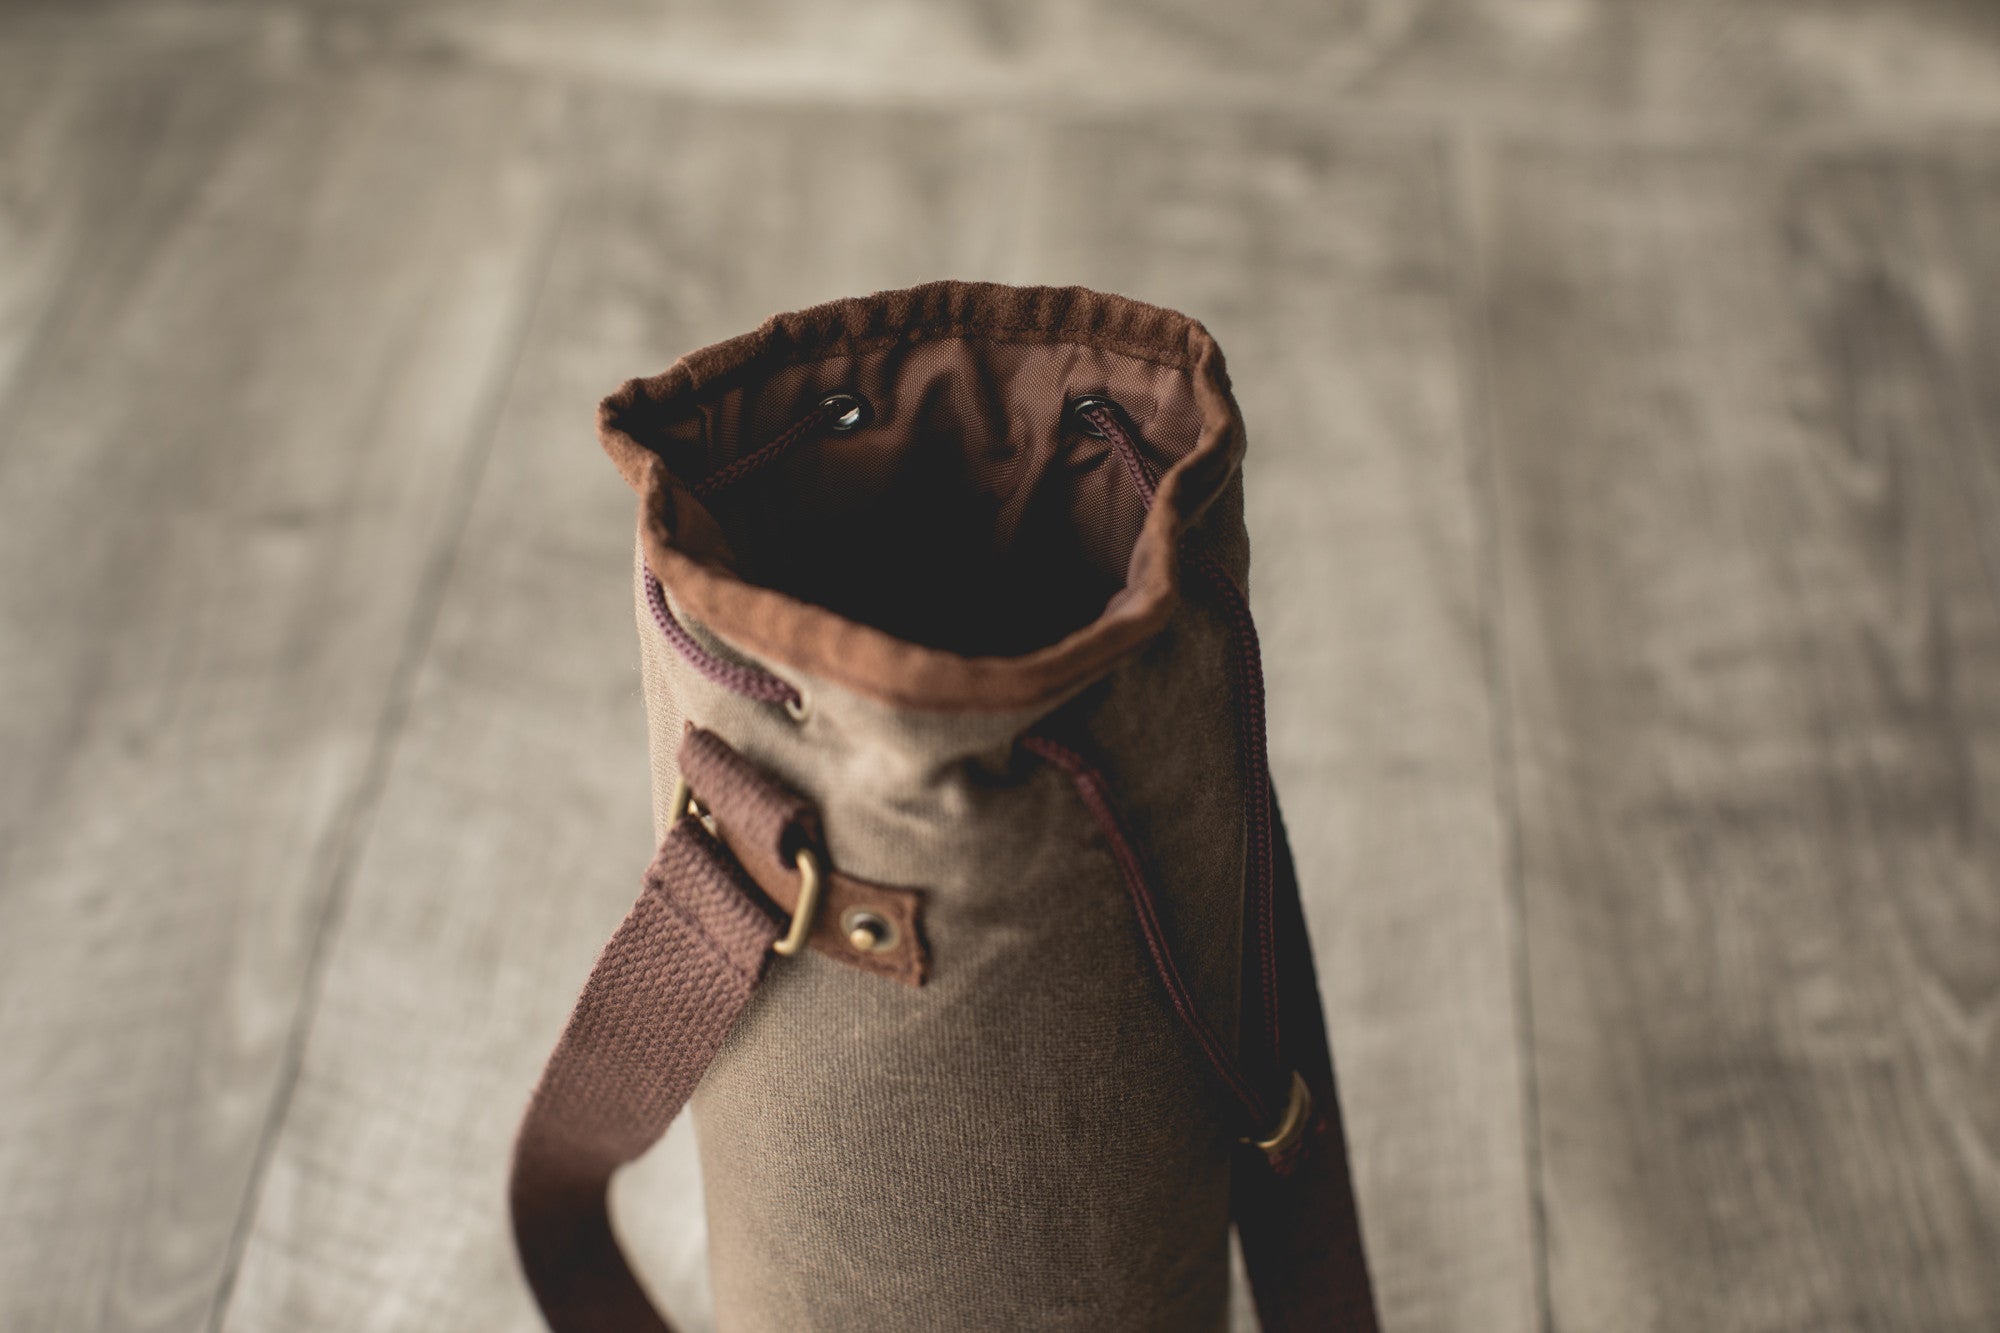 San Francisco 49ers - Waxed Canvas Wine Tote